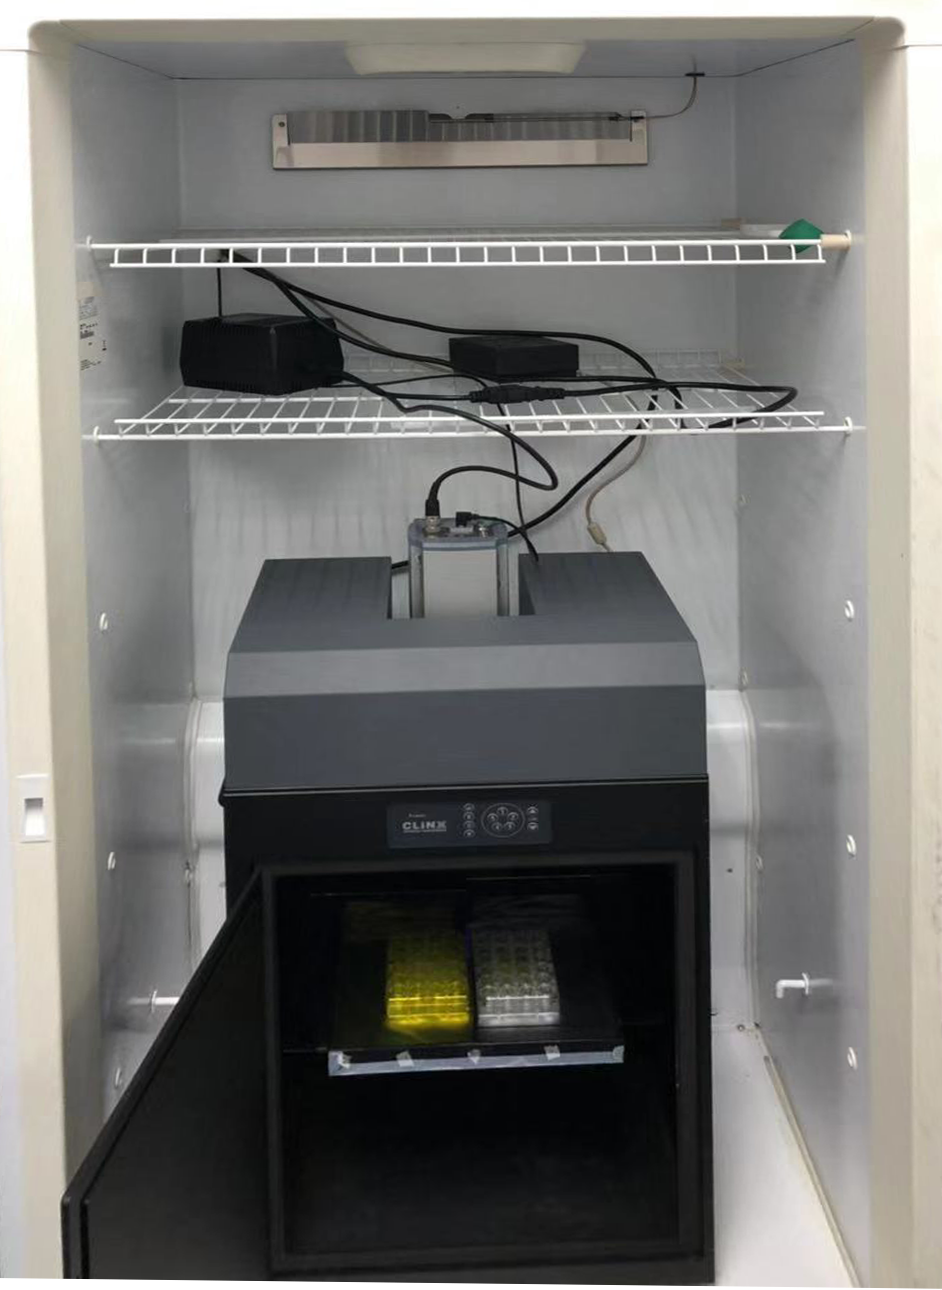 The iKon-M deep cooled CCD camera is widely used for luminescence imaging. In this example within a temperature-controlled light sealed chamber for plant imaging. Many other set-ups using high throughput plate format or microfluidic systems are also in use.